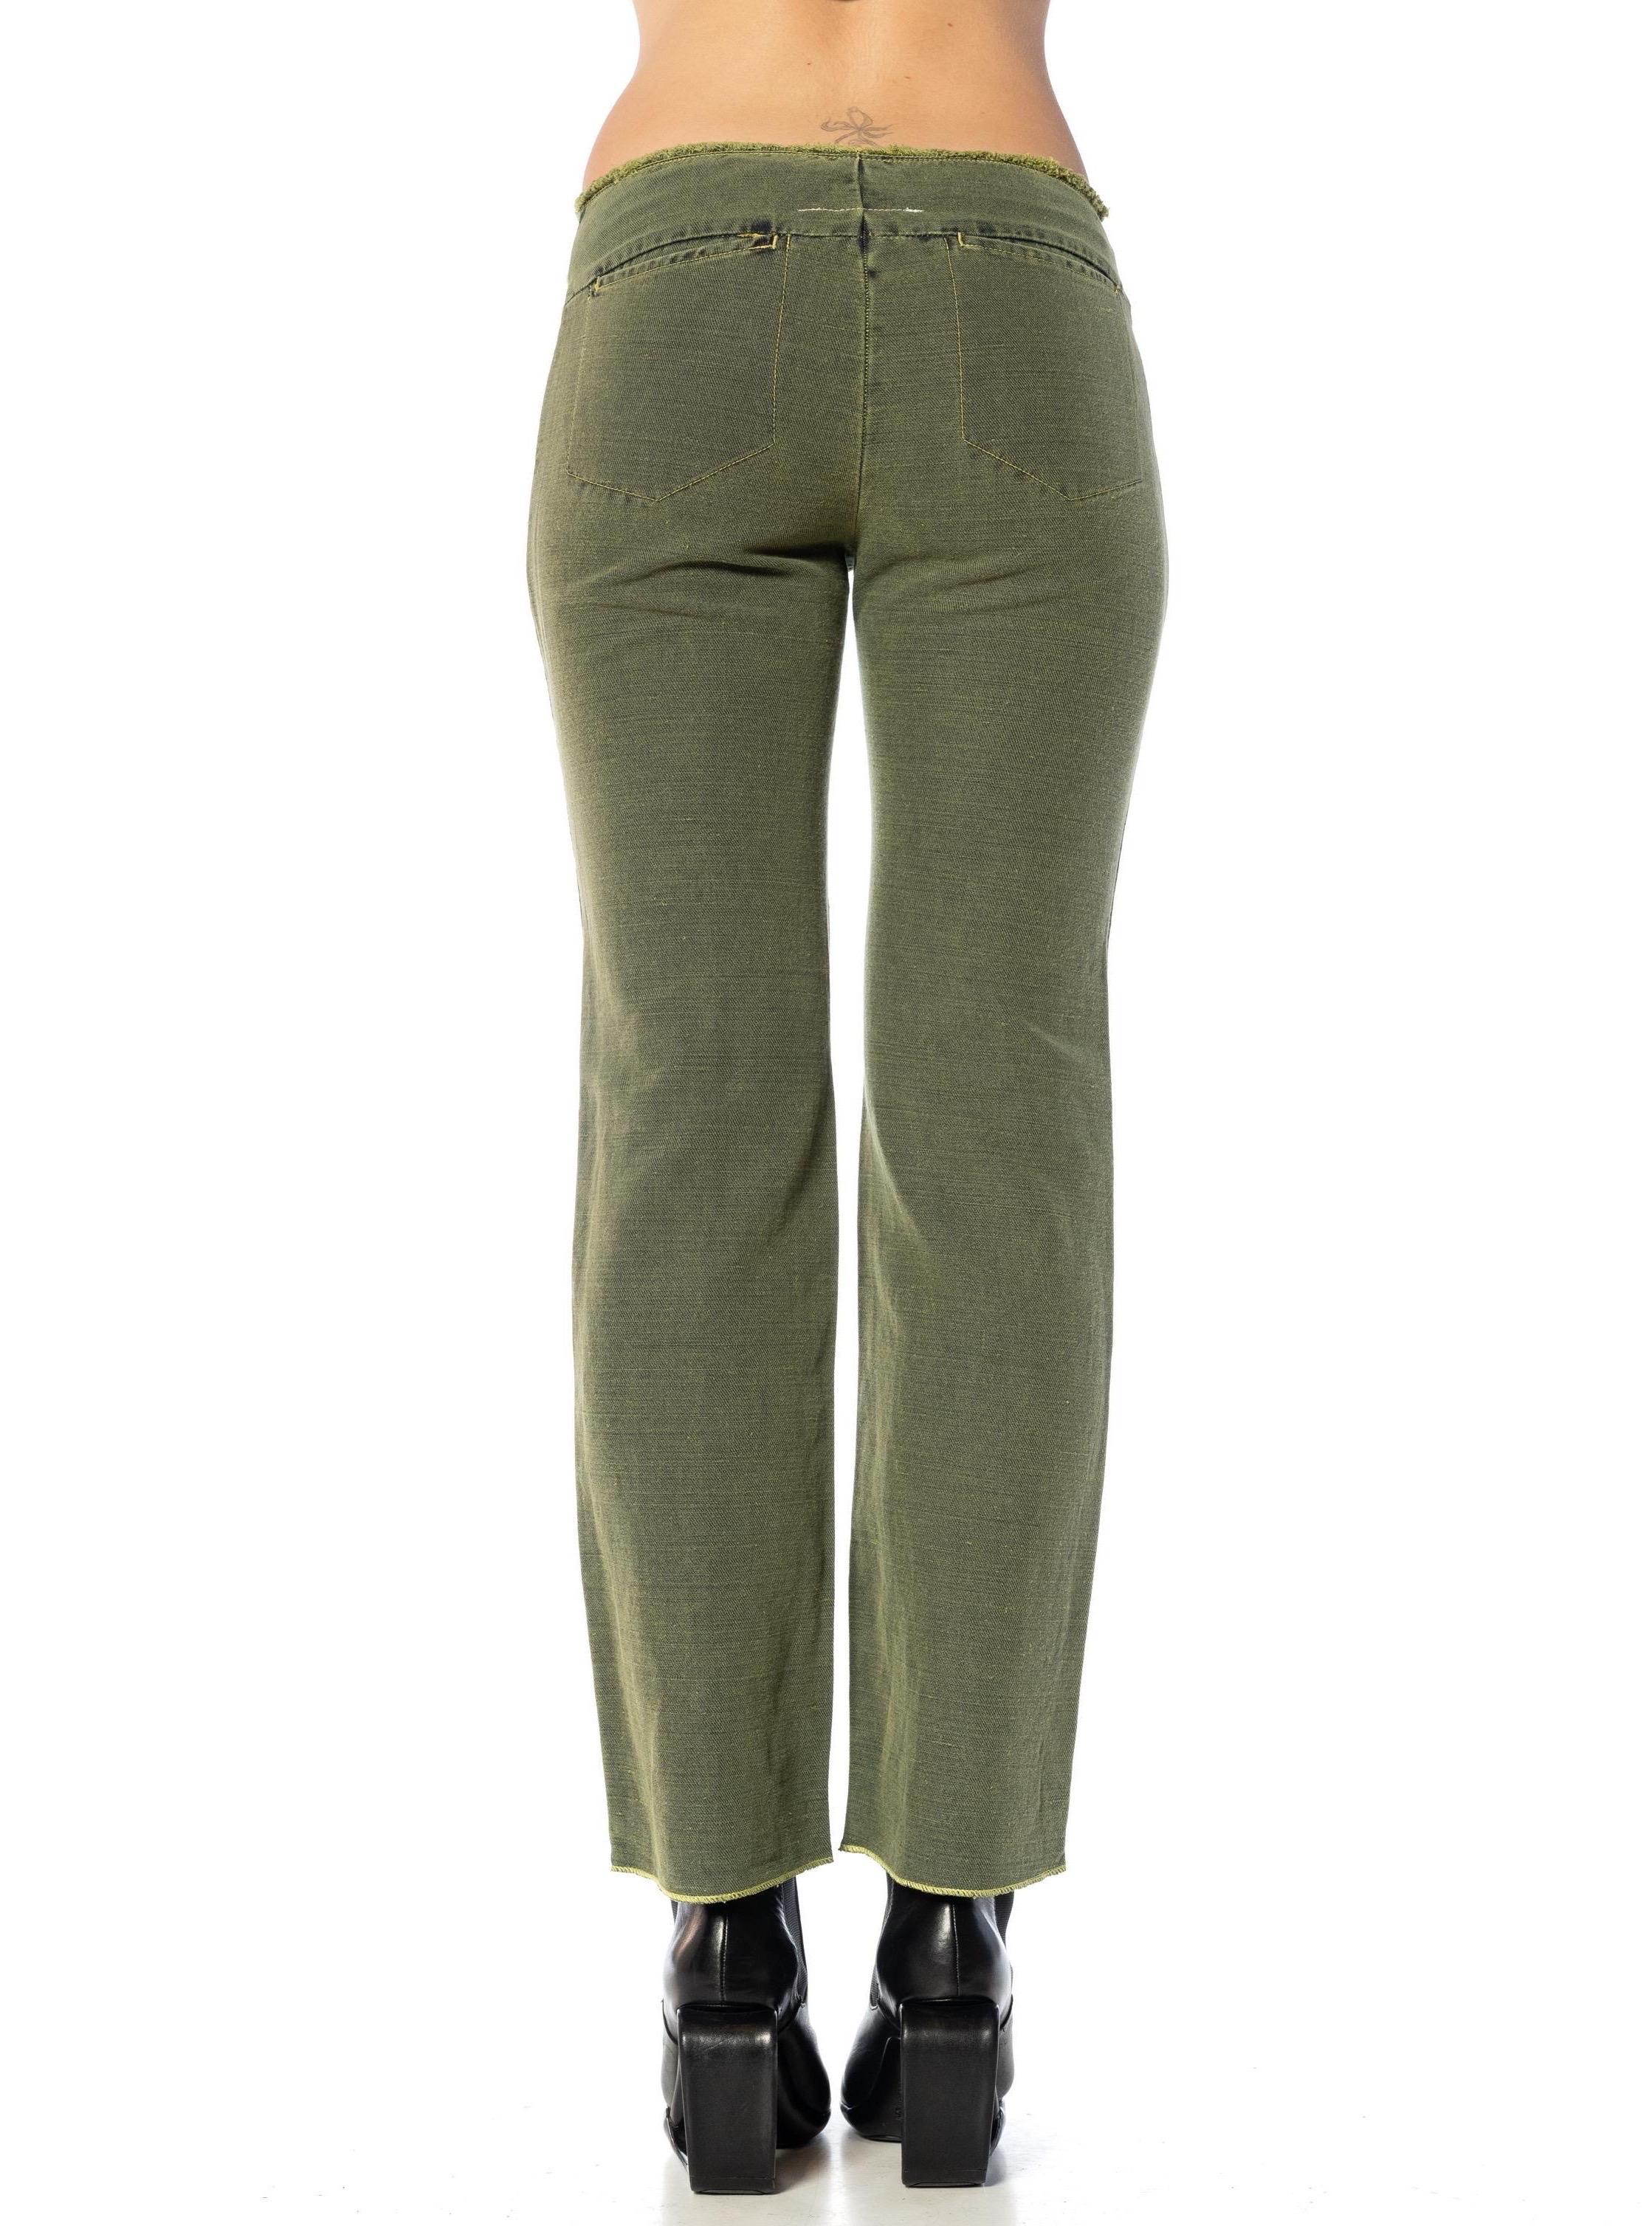 2000S MARTIN MARGIELA Forrest Green Cotton & Linen Relaxed Fit Jeans For Sale 3